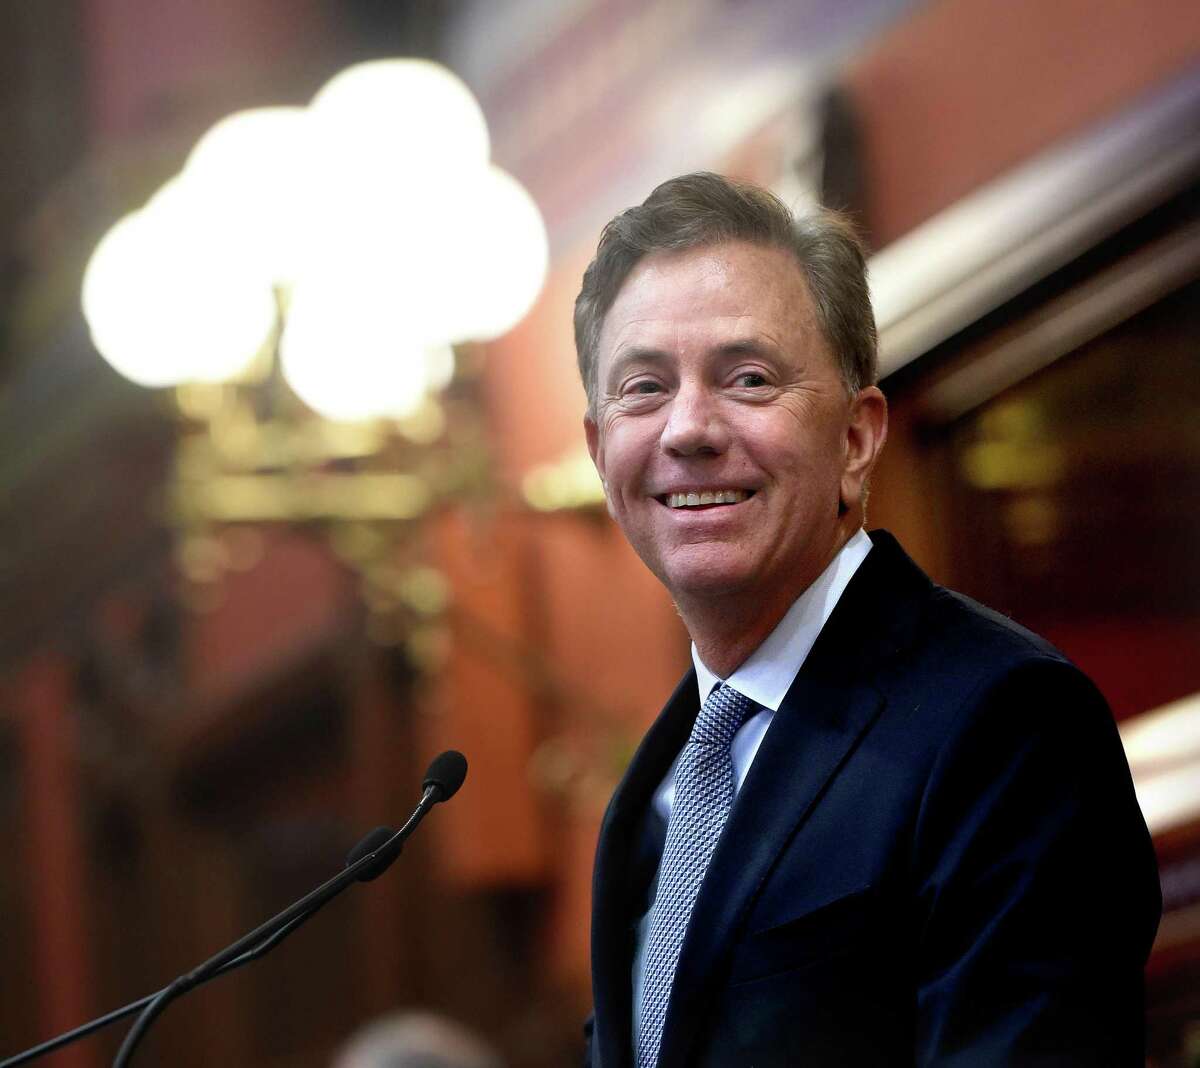 Governor Ned Lamont on Wednesday indicated thst there is a bipartisan path toward agreement in the legislature on transit improvements.